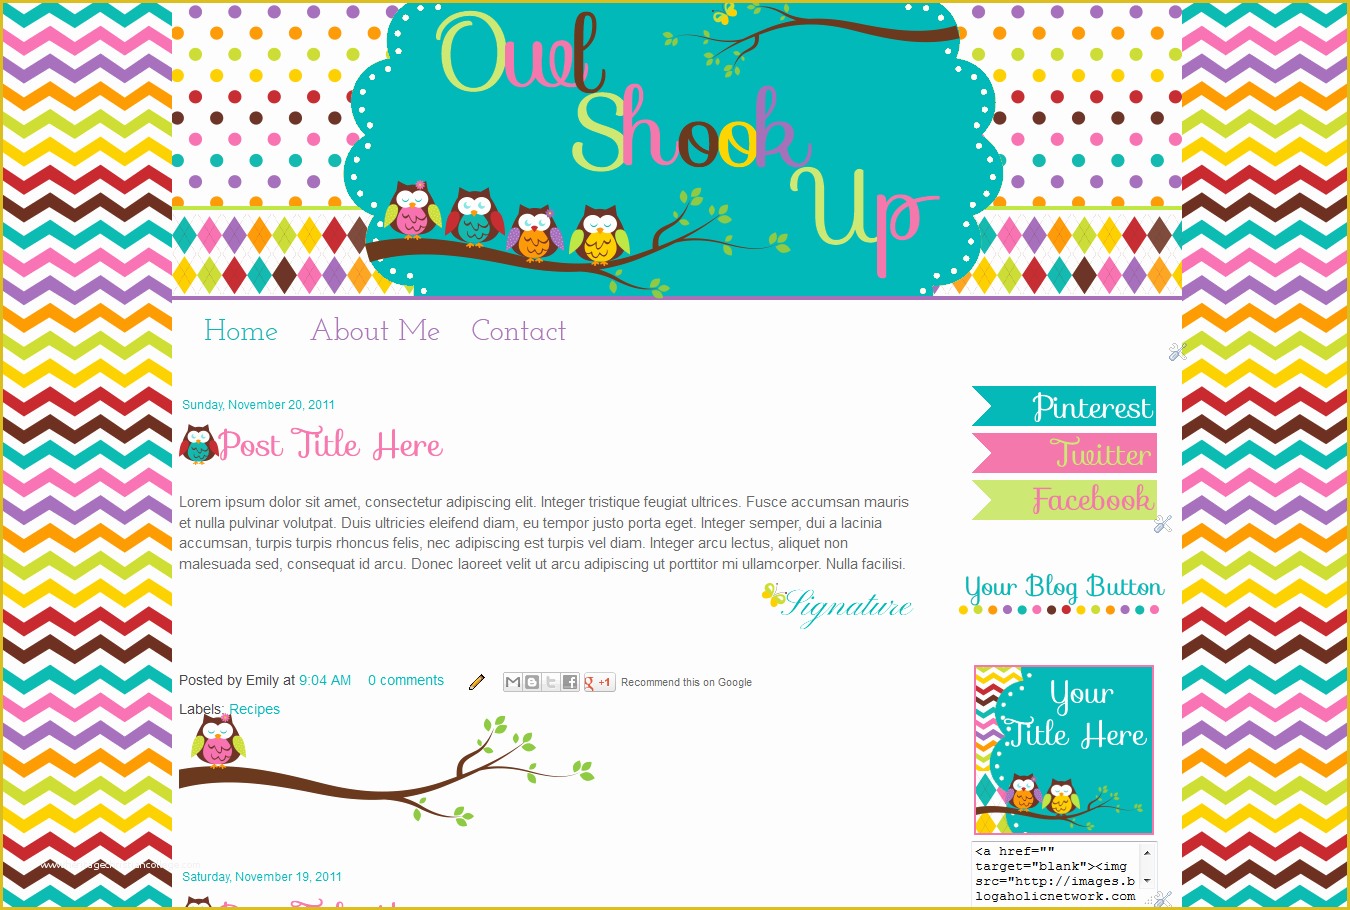 Free Blogger Templates Of Premade Blogger Template with Owls and Bright Colors